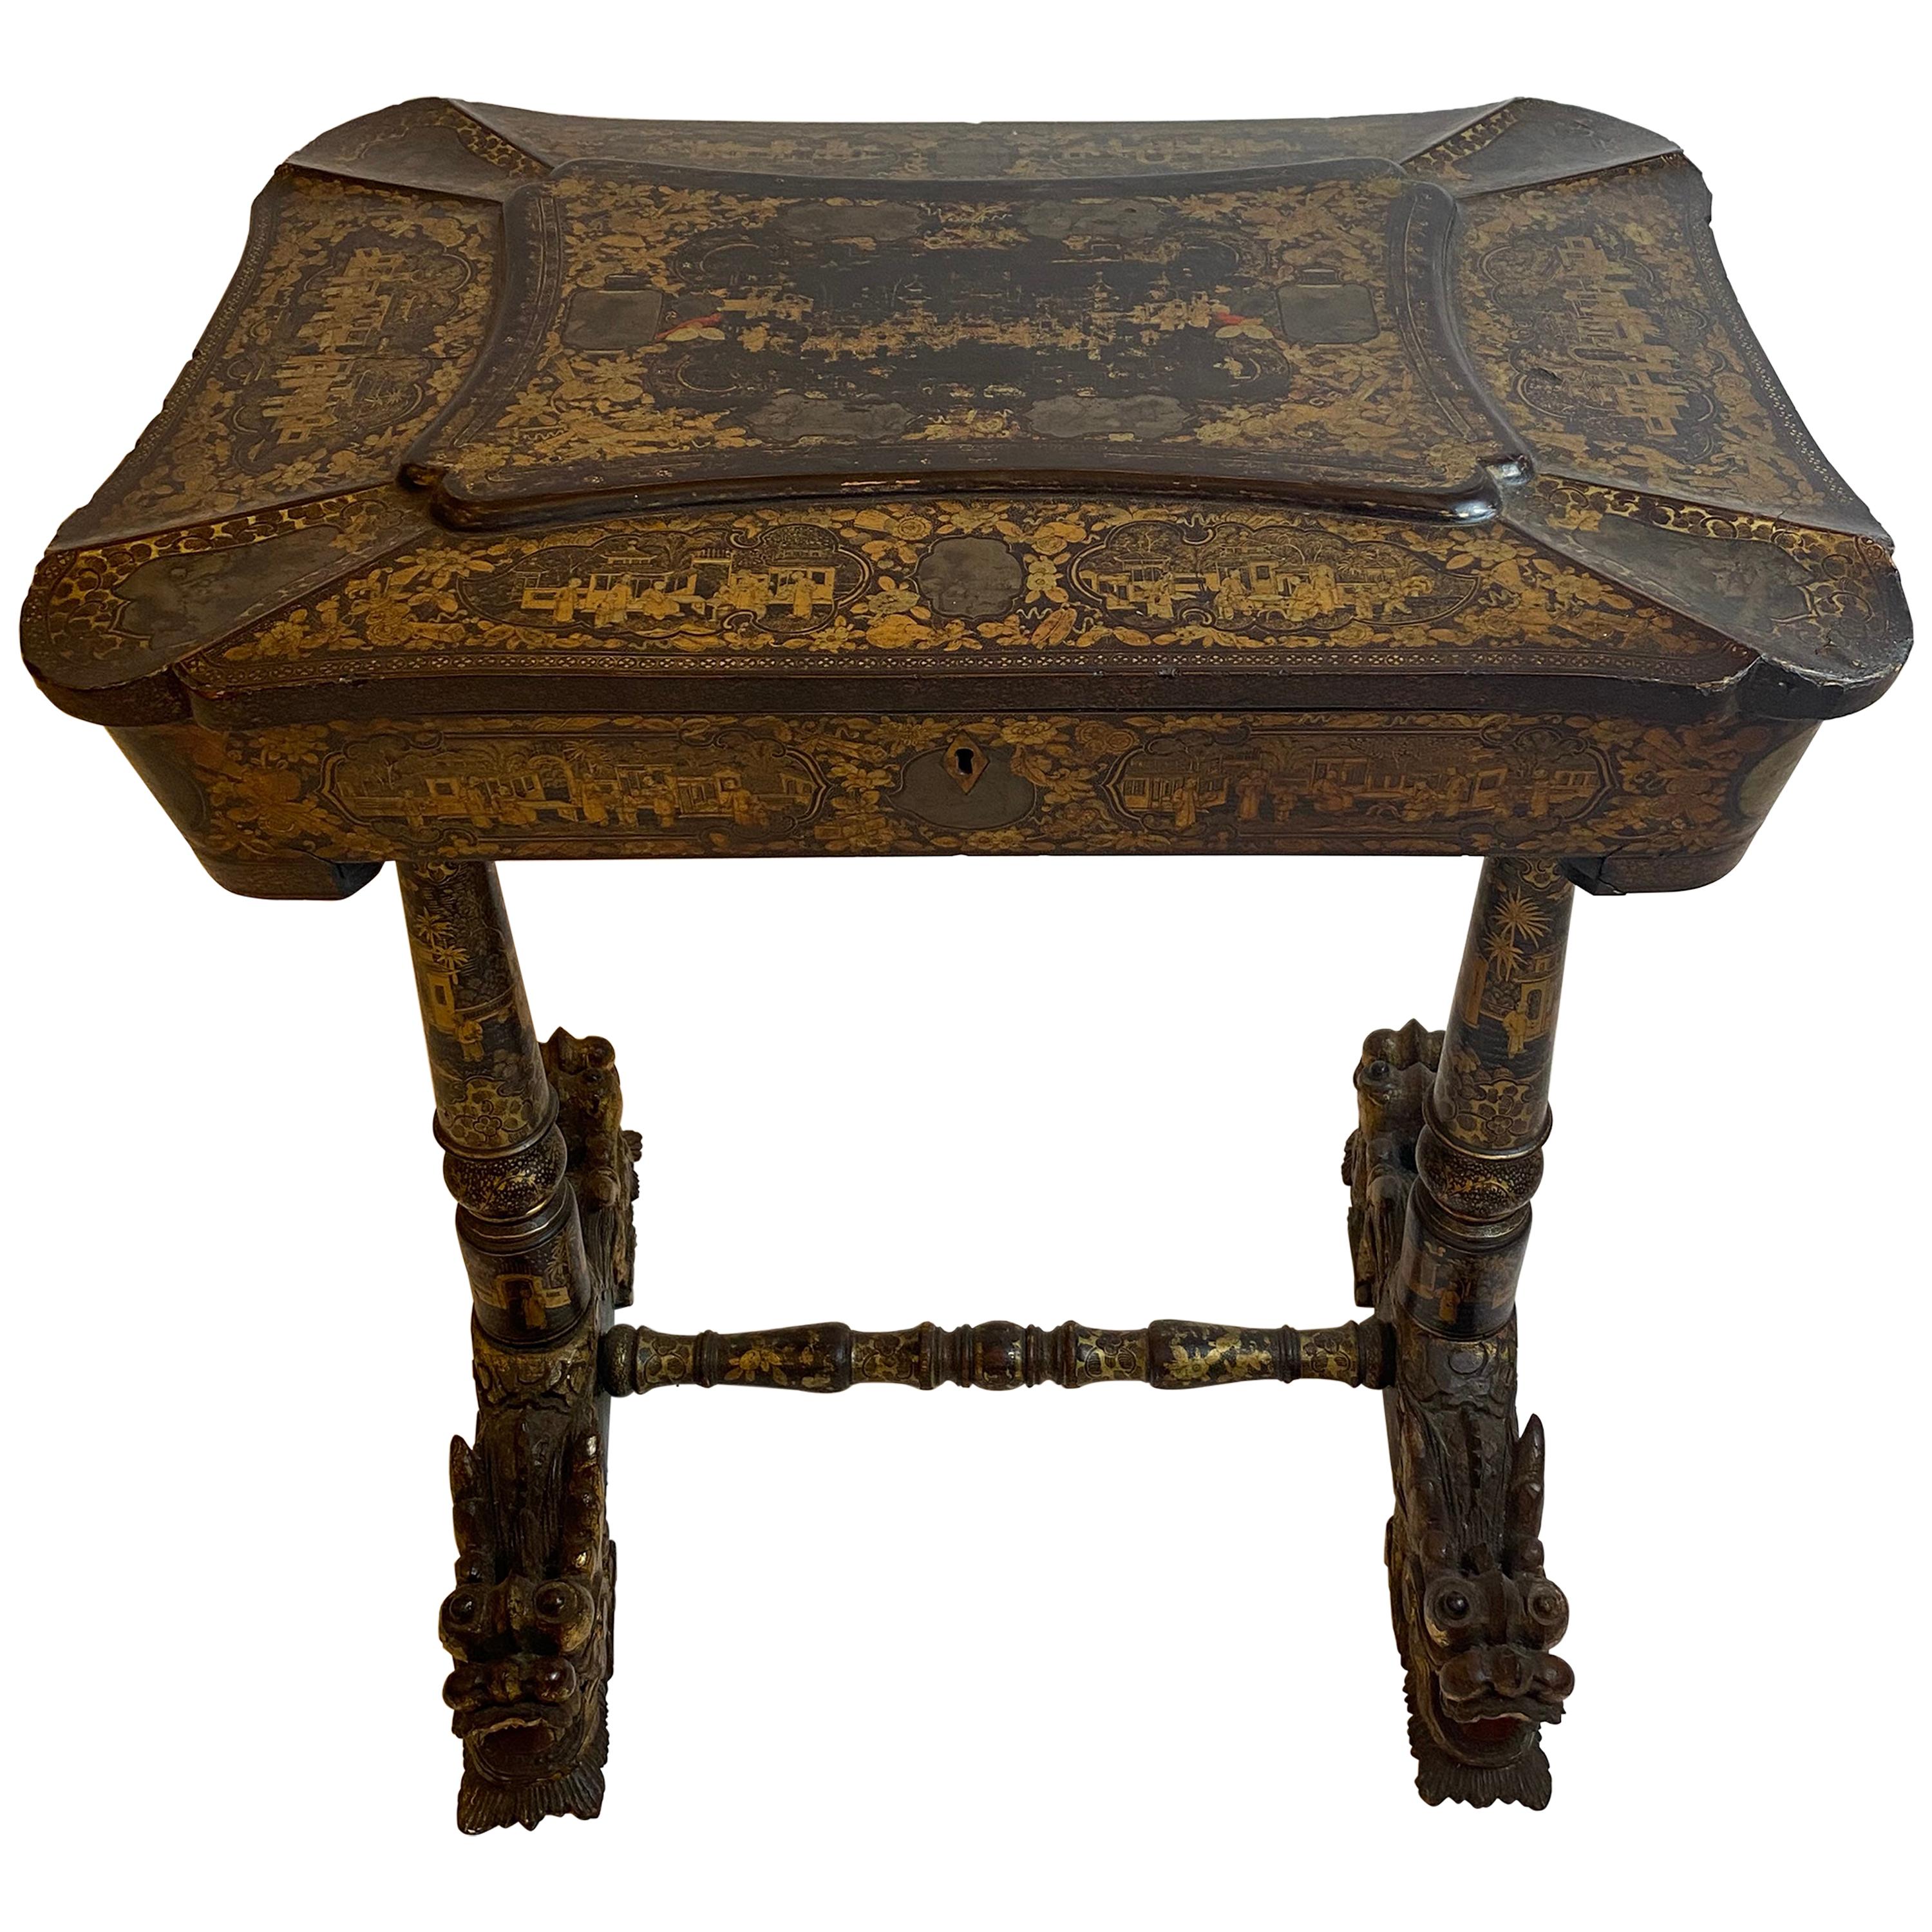 Early 19th Century Chinese Export Lacquer and Gilt Work Table